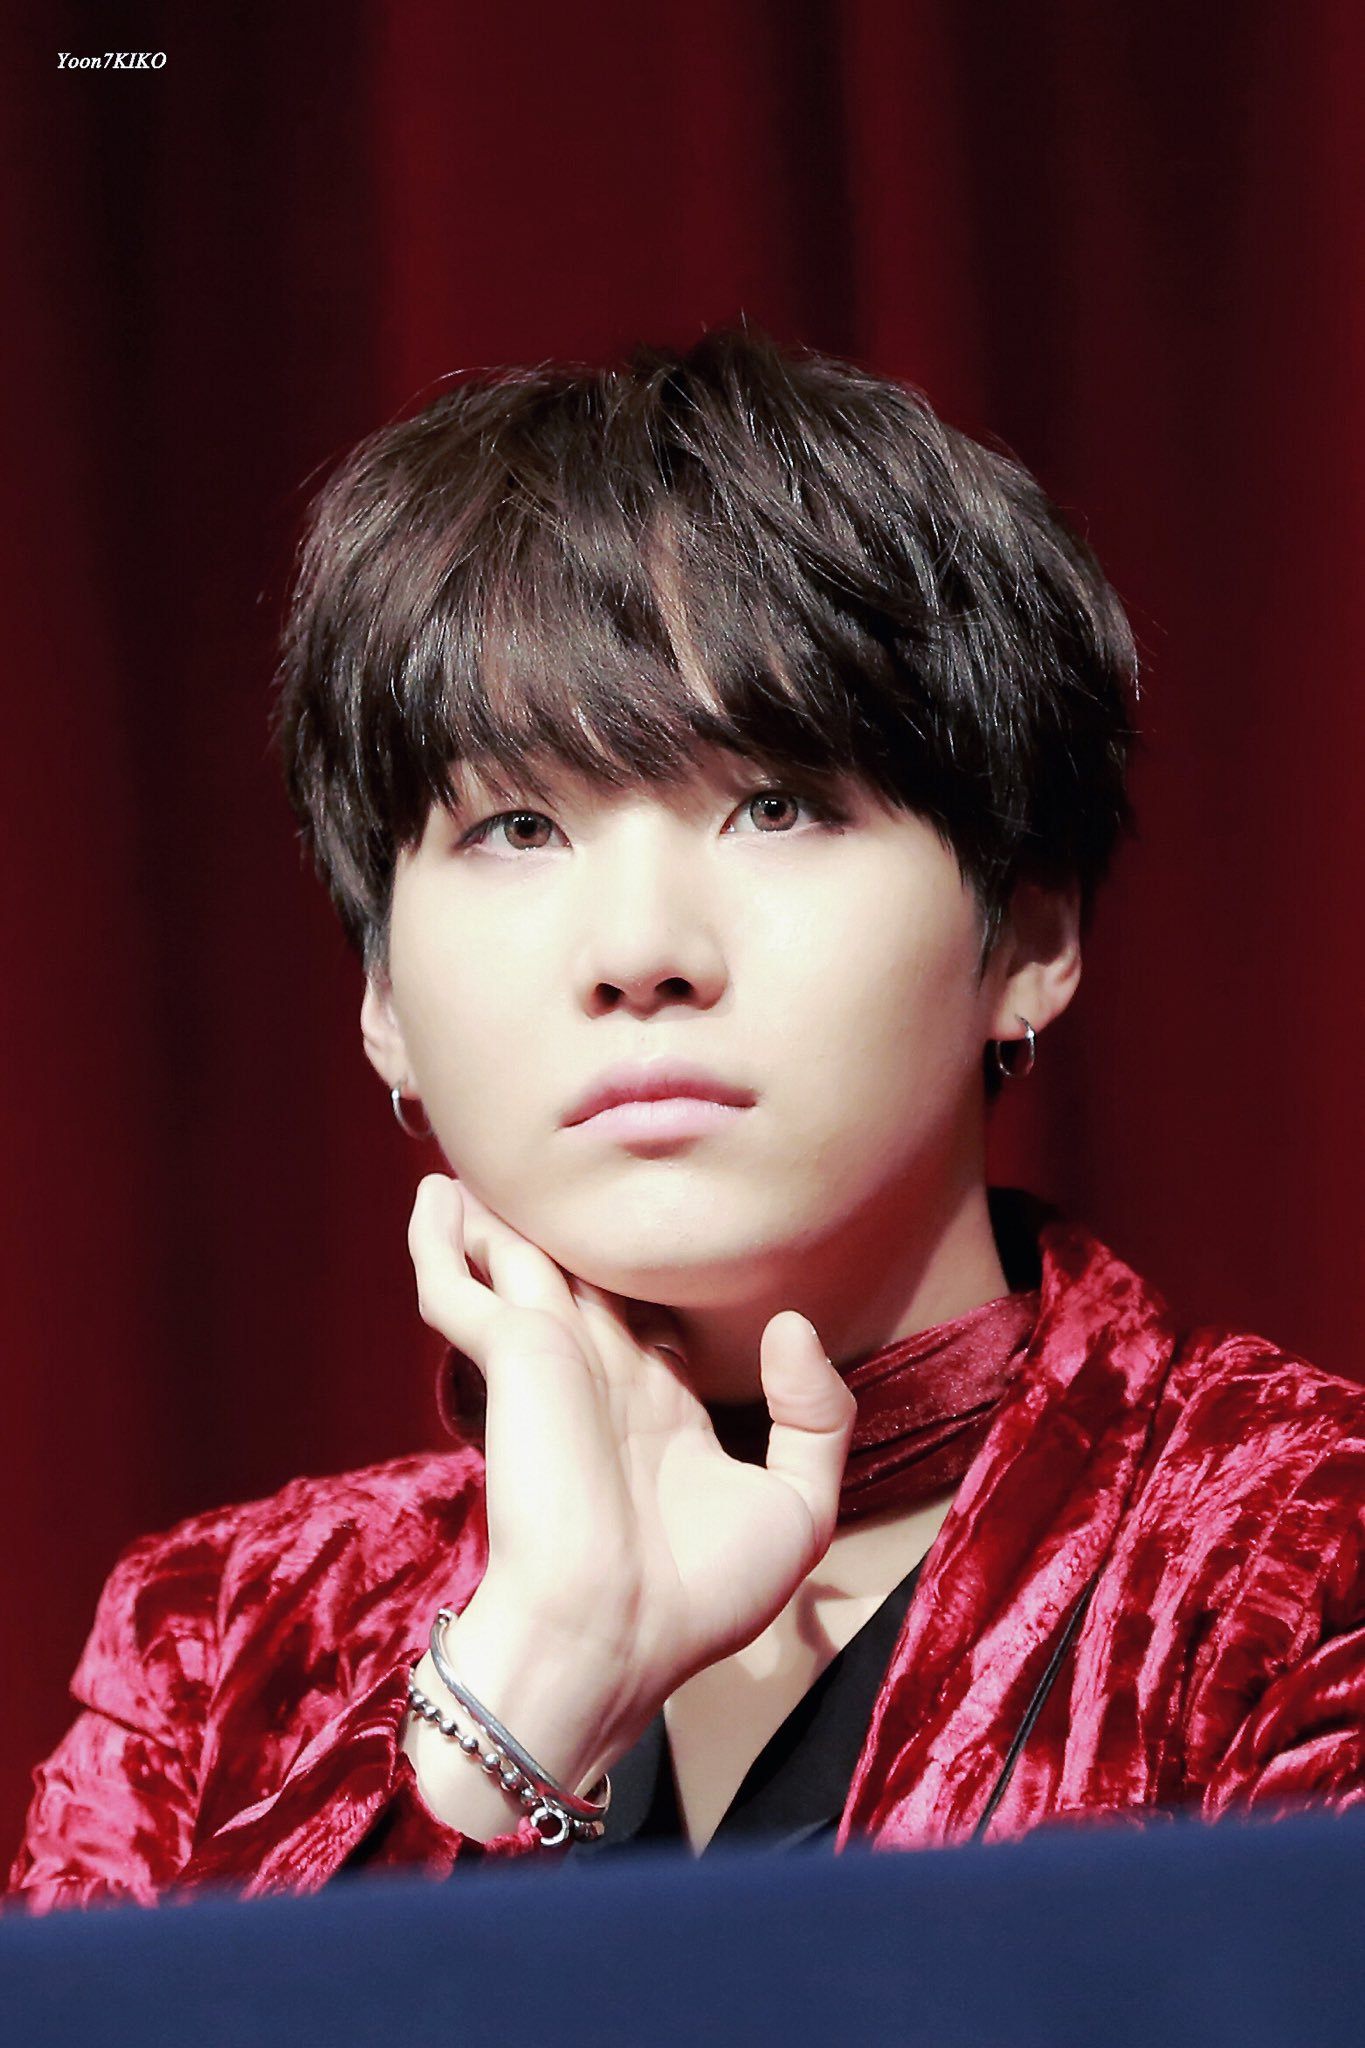  BTS  Suga  Struggles With Depression Over His Appearance 